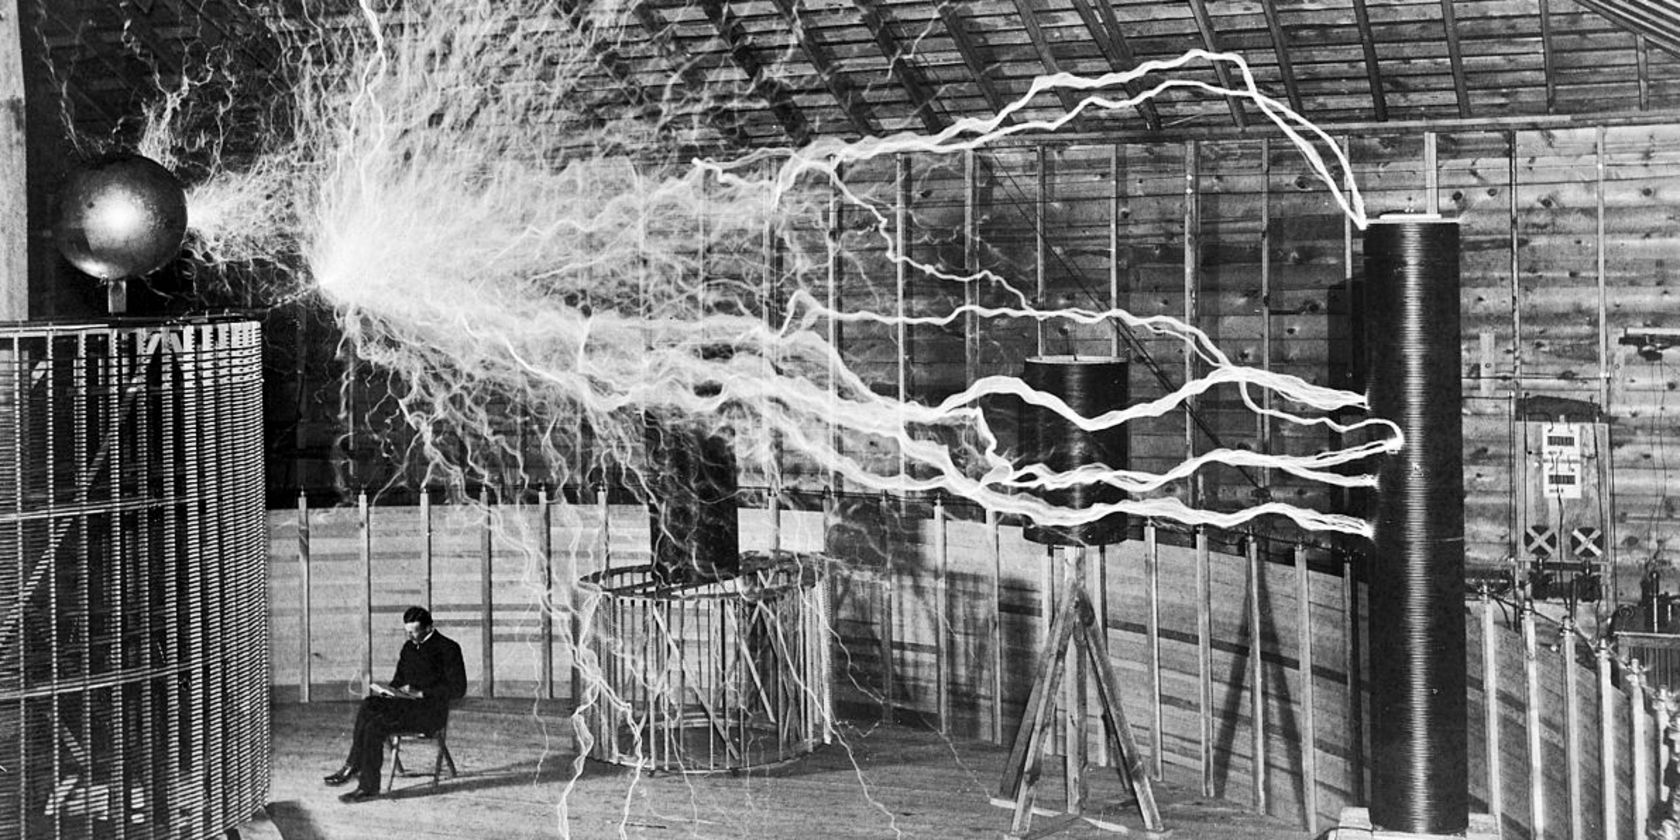 picture of tesla and his coils